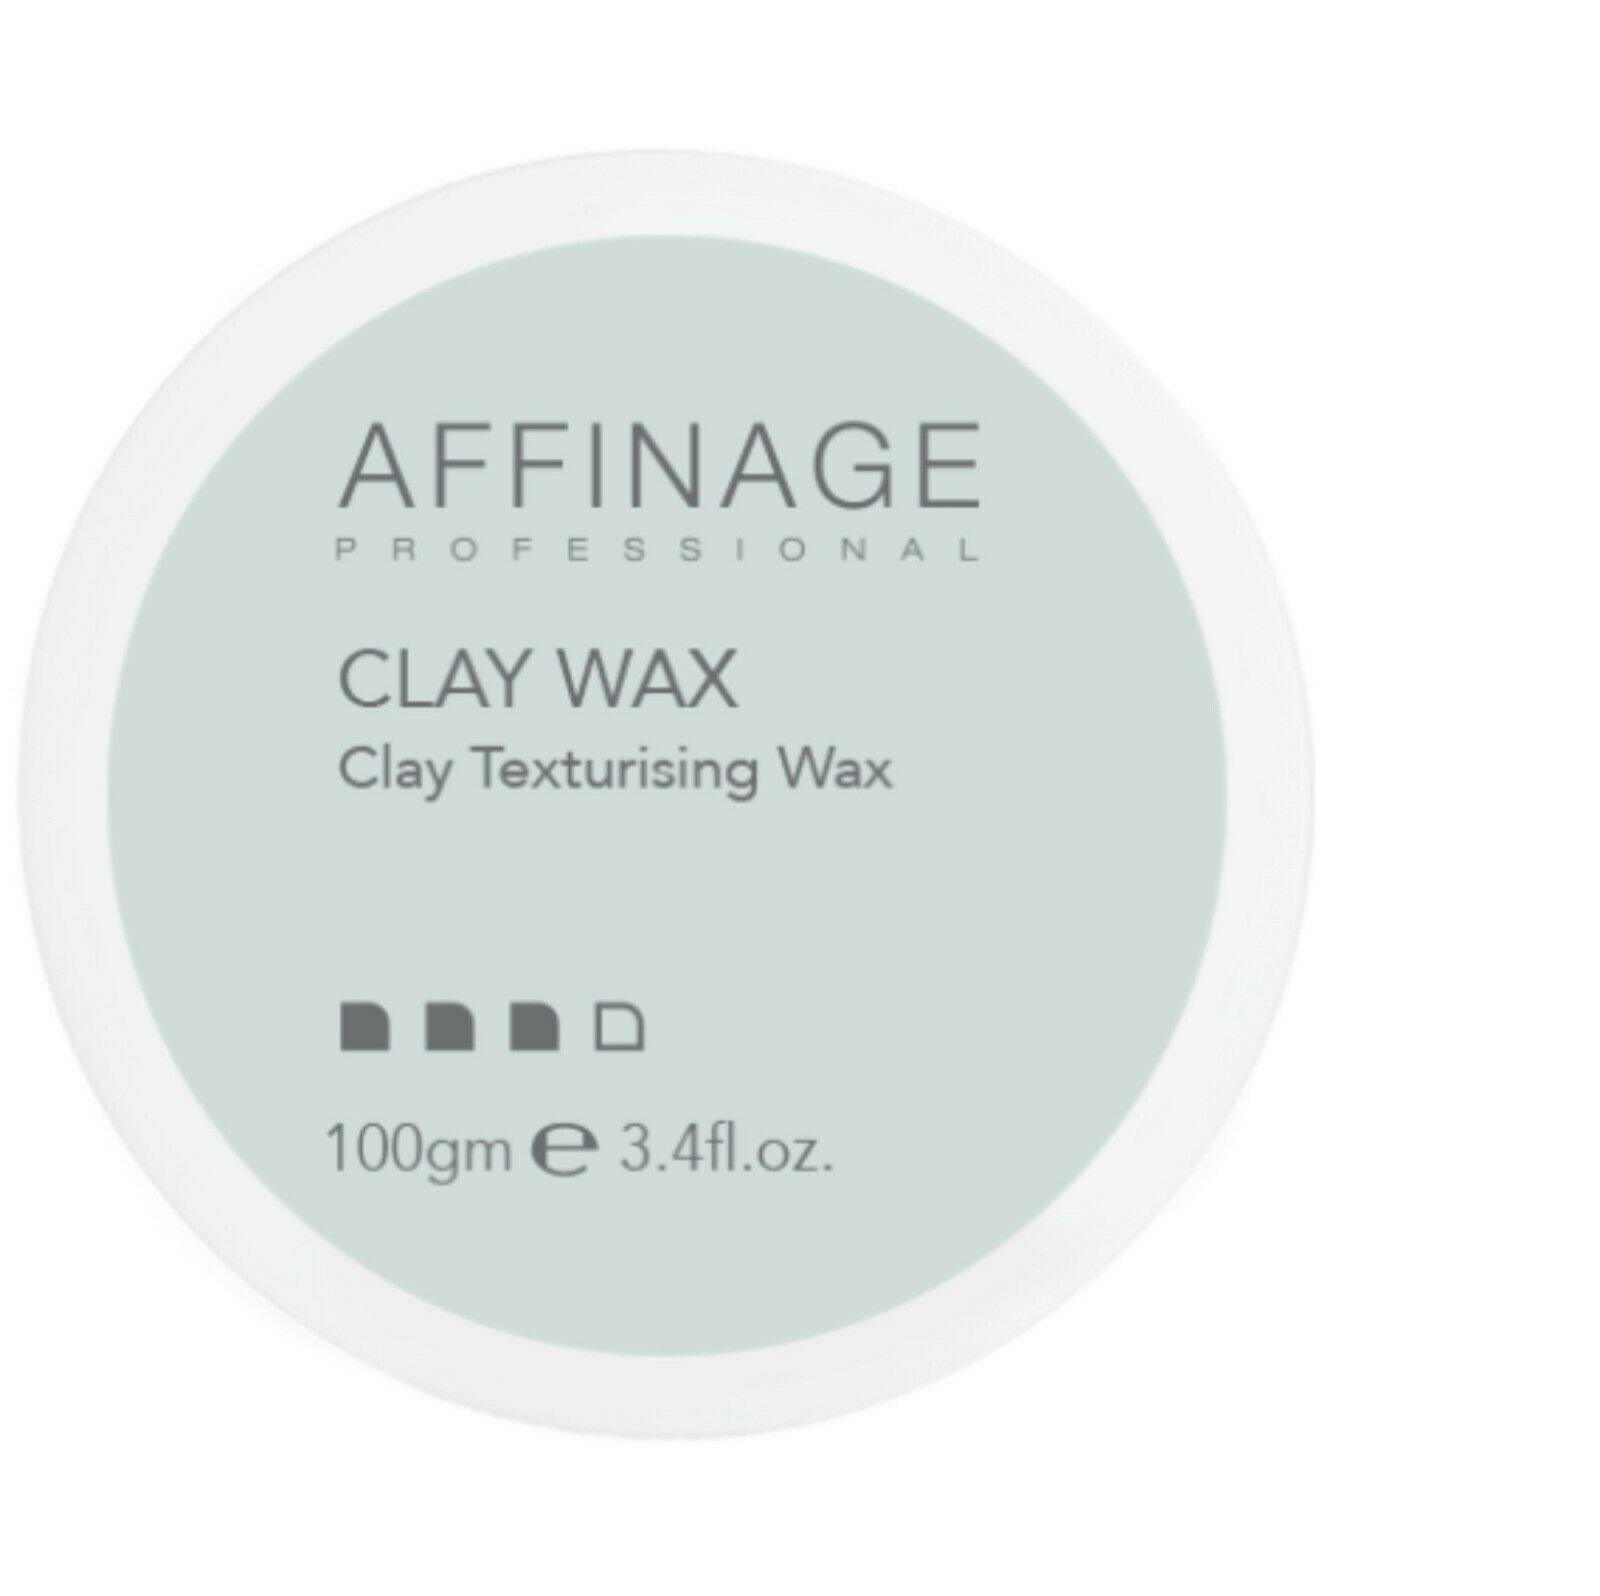 iaahhaircare,Affinage Professional Clay Texturising Wax 100ml x 1,Styling Products,Affinage Styling